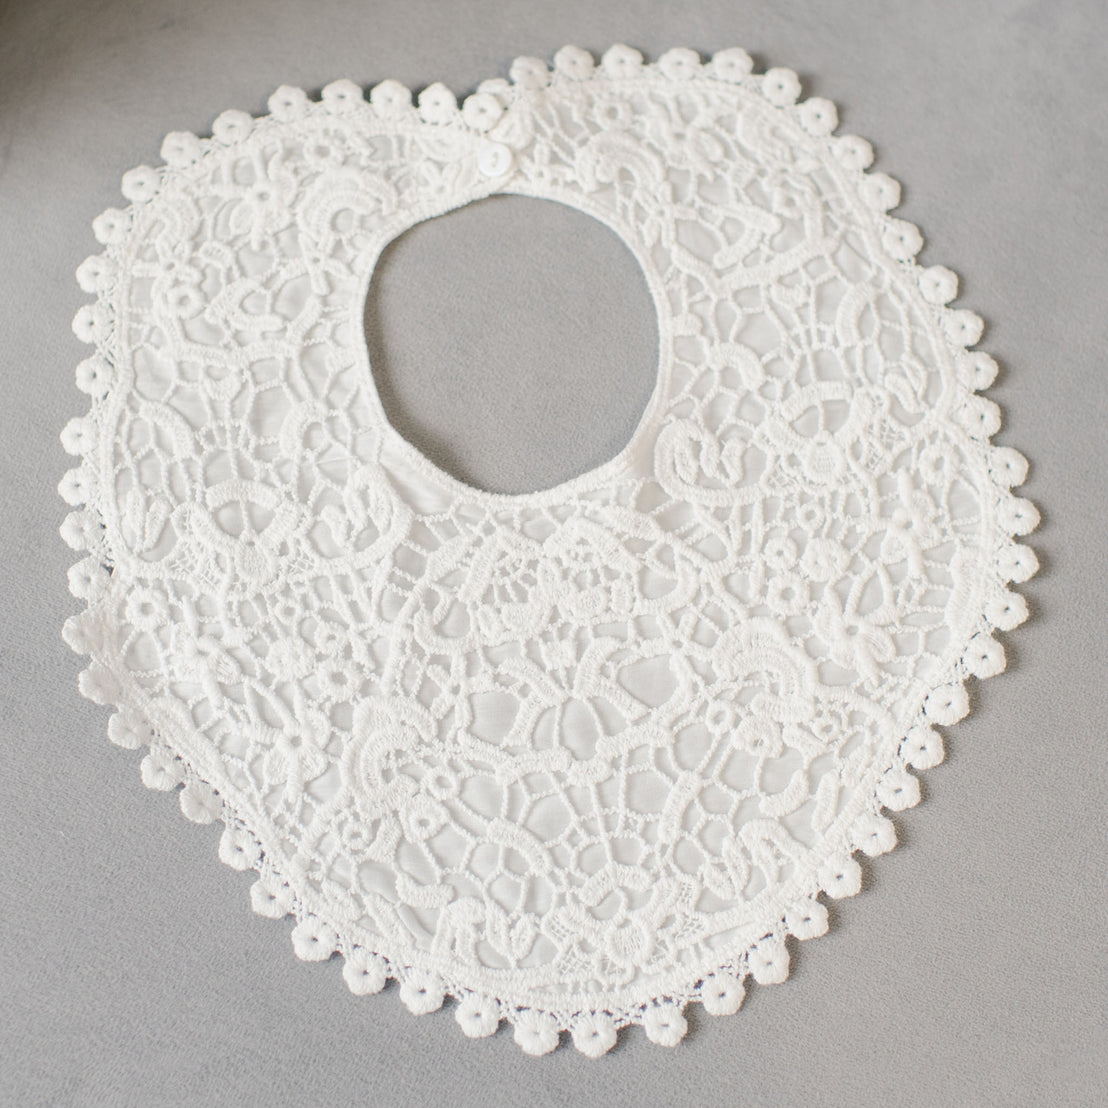 A white Grace Lace Bib collar with intricate floral patterns and scalloped edges displayed on a grey background.